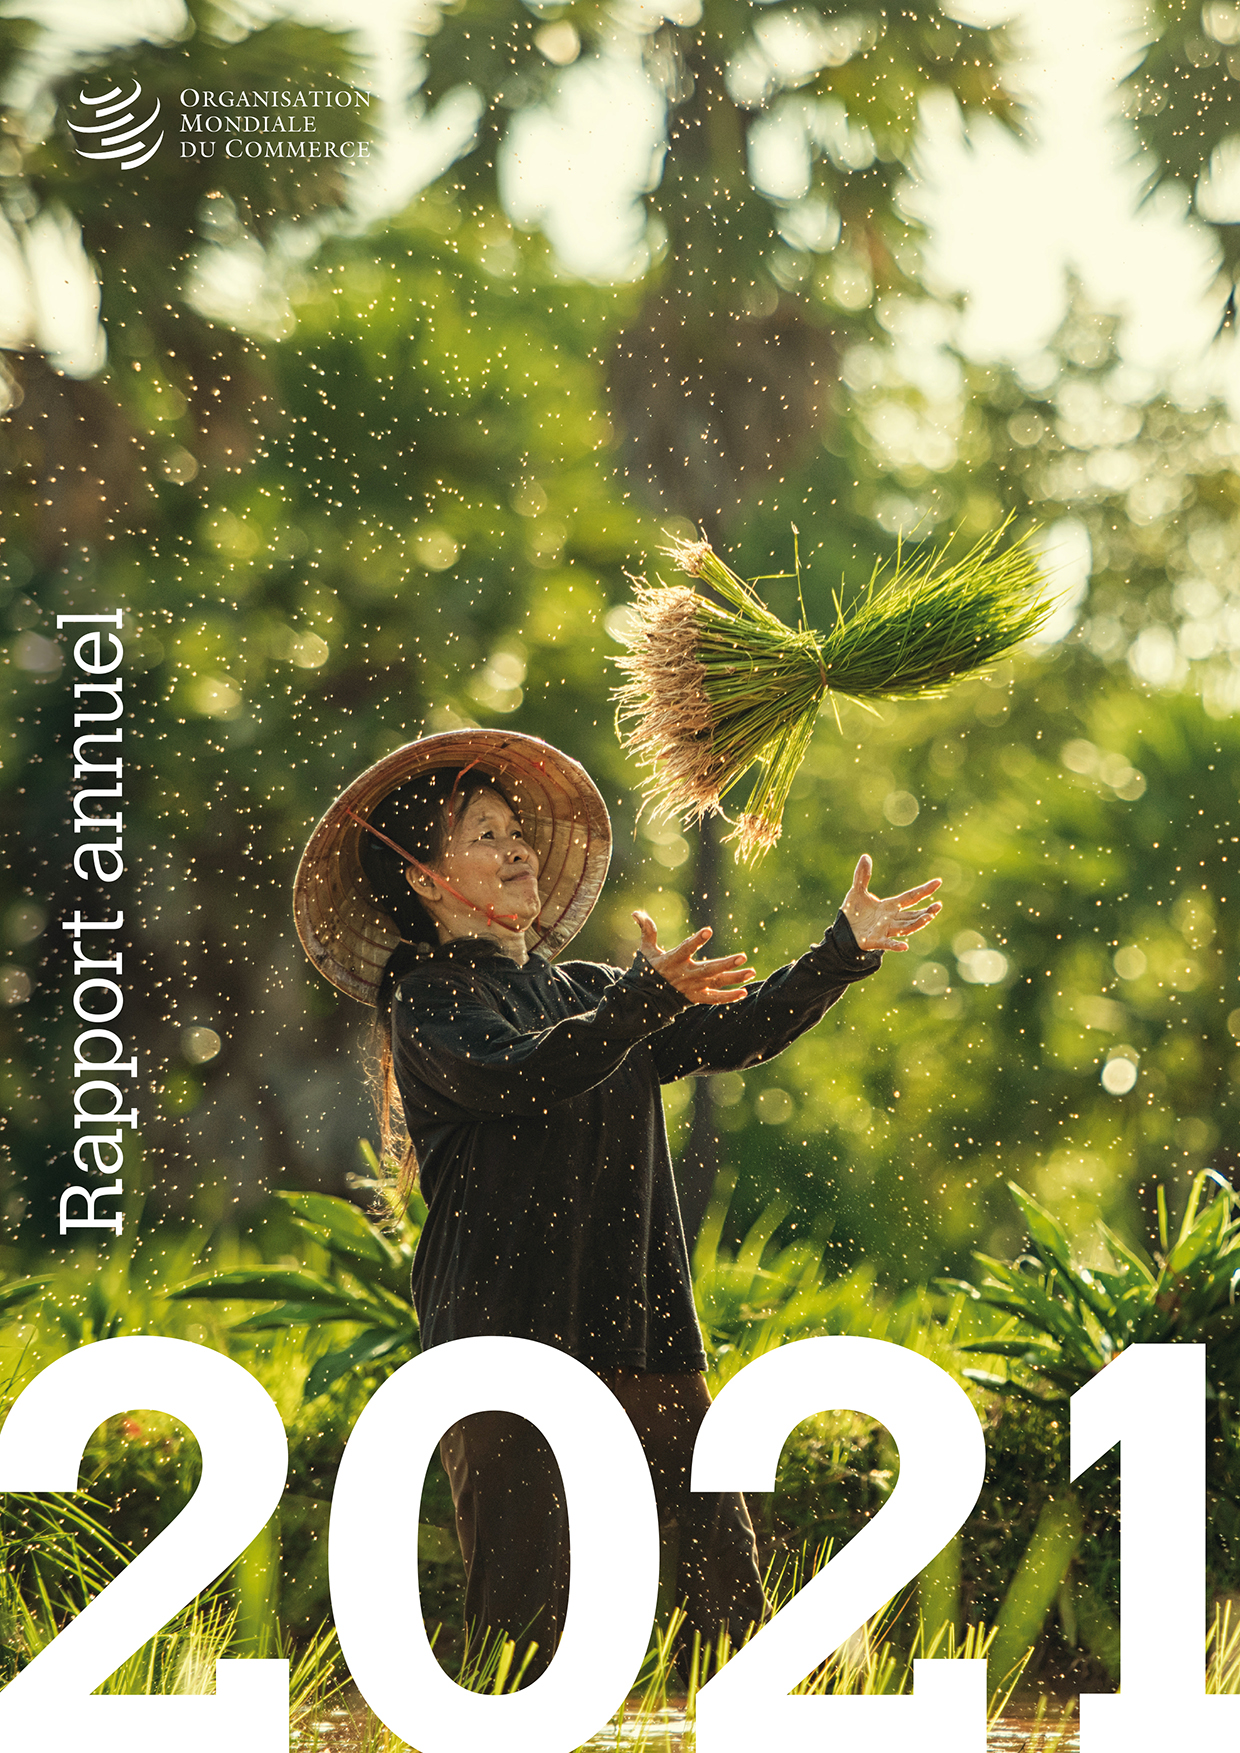 image of Rapport annuel 2021